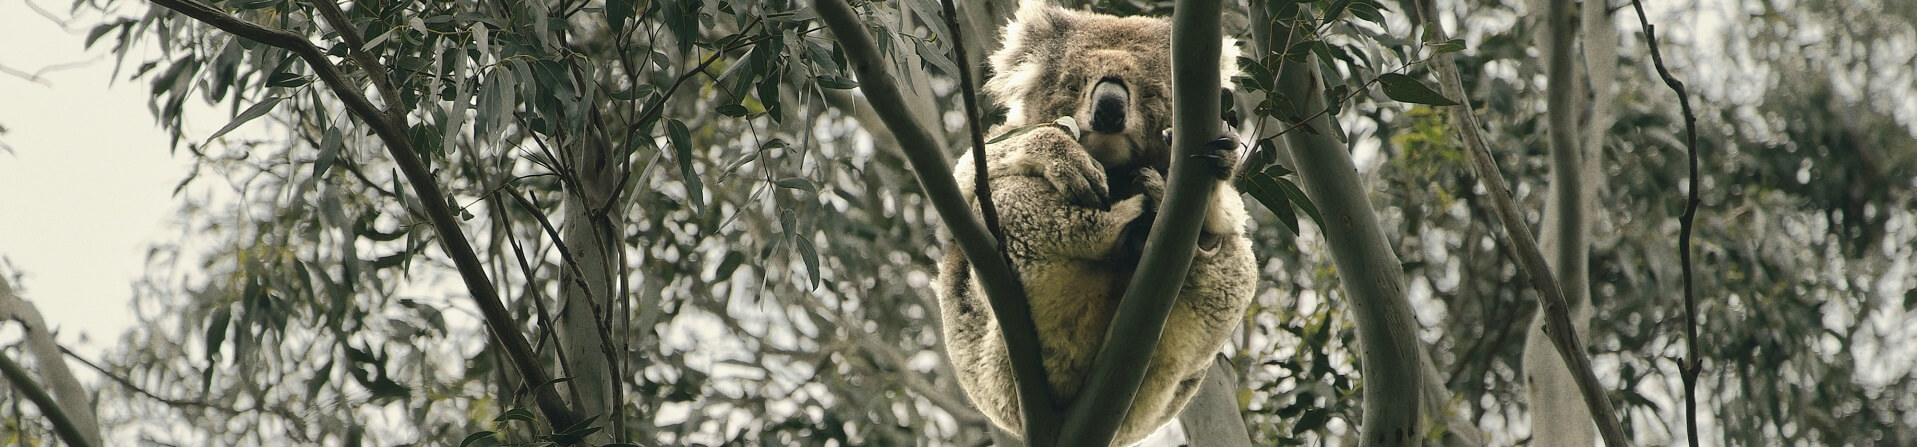 Are there koalas in the Otways?